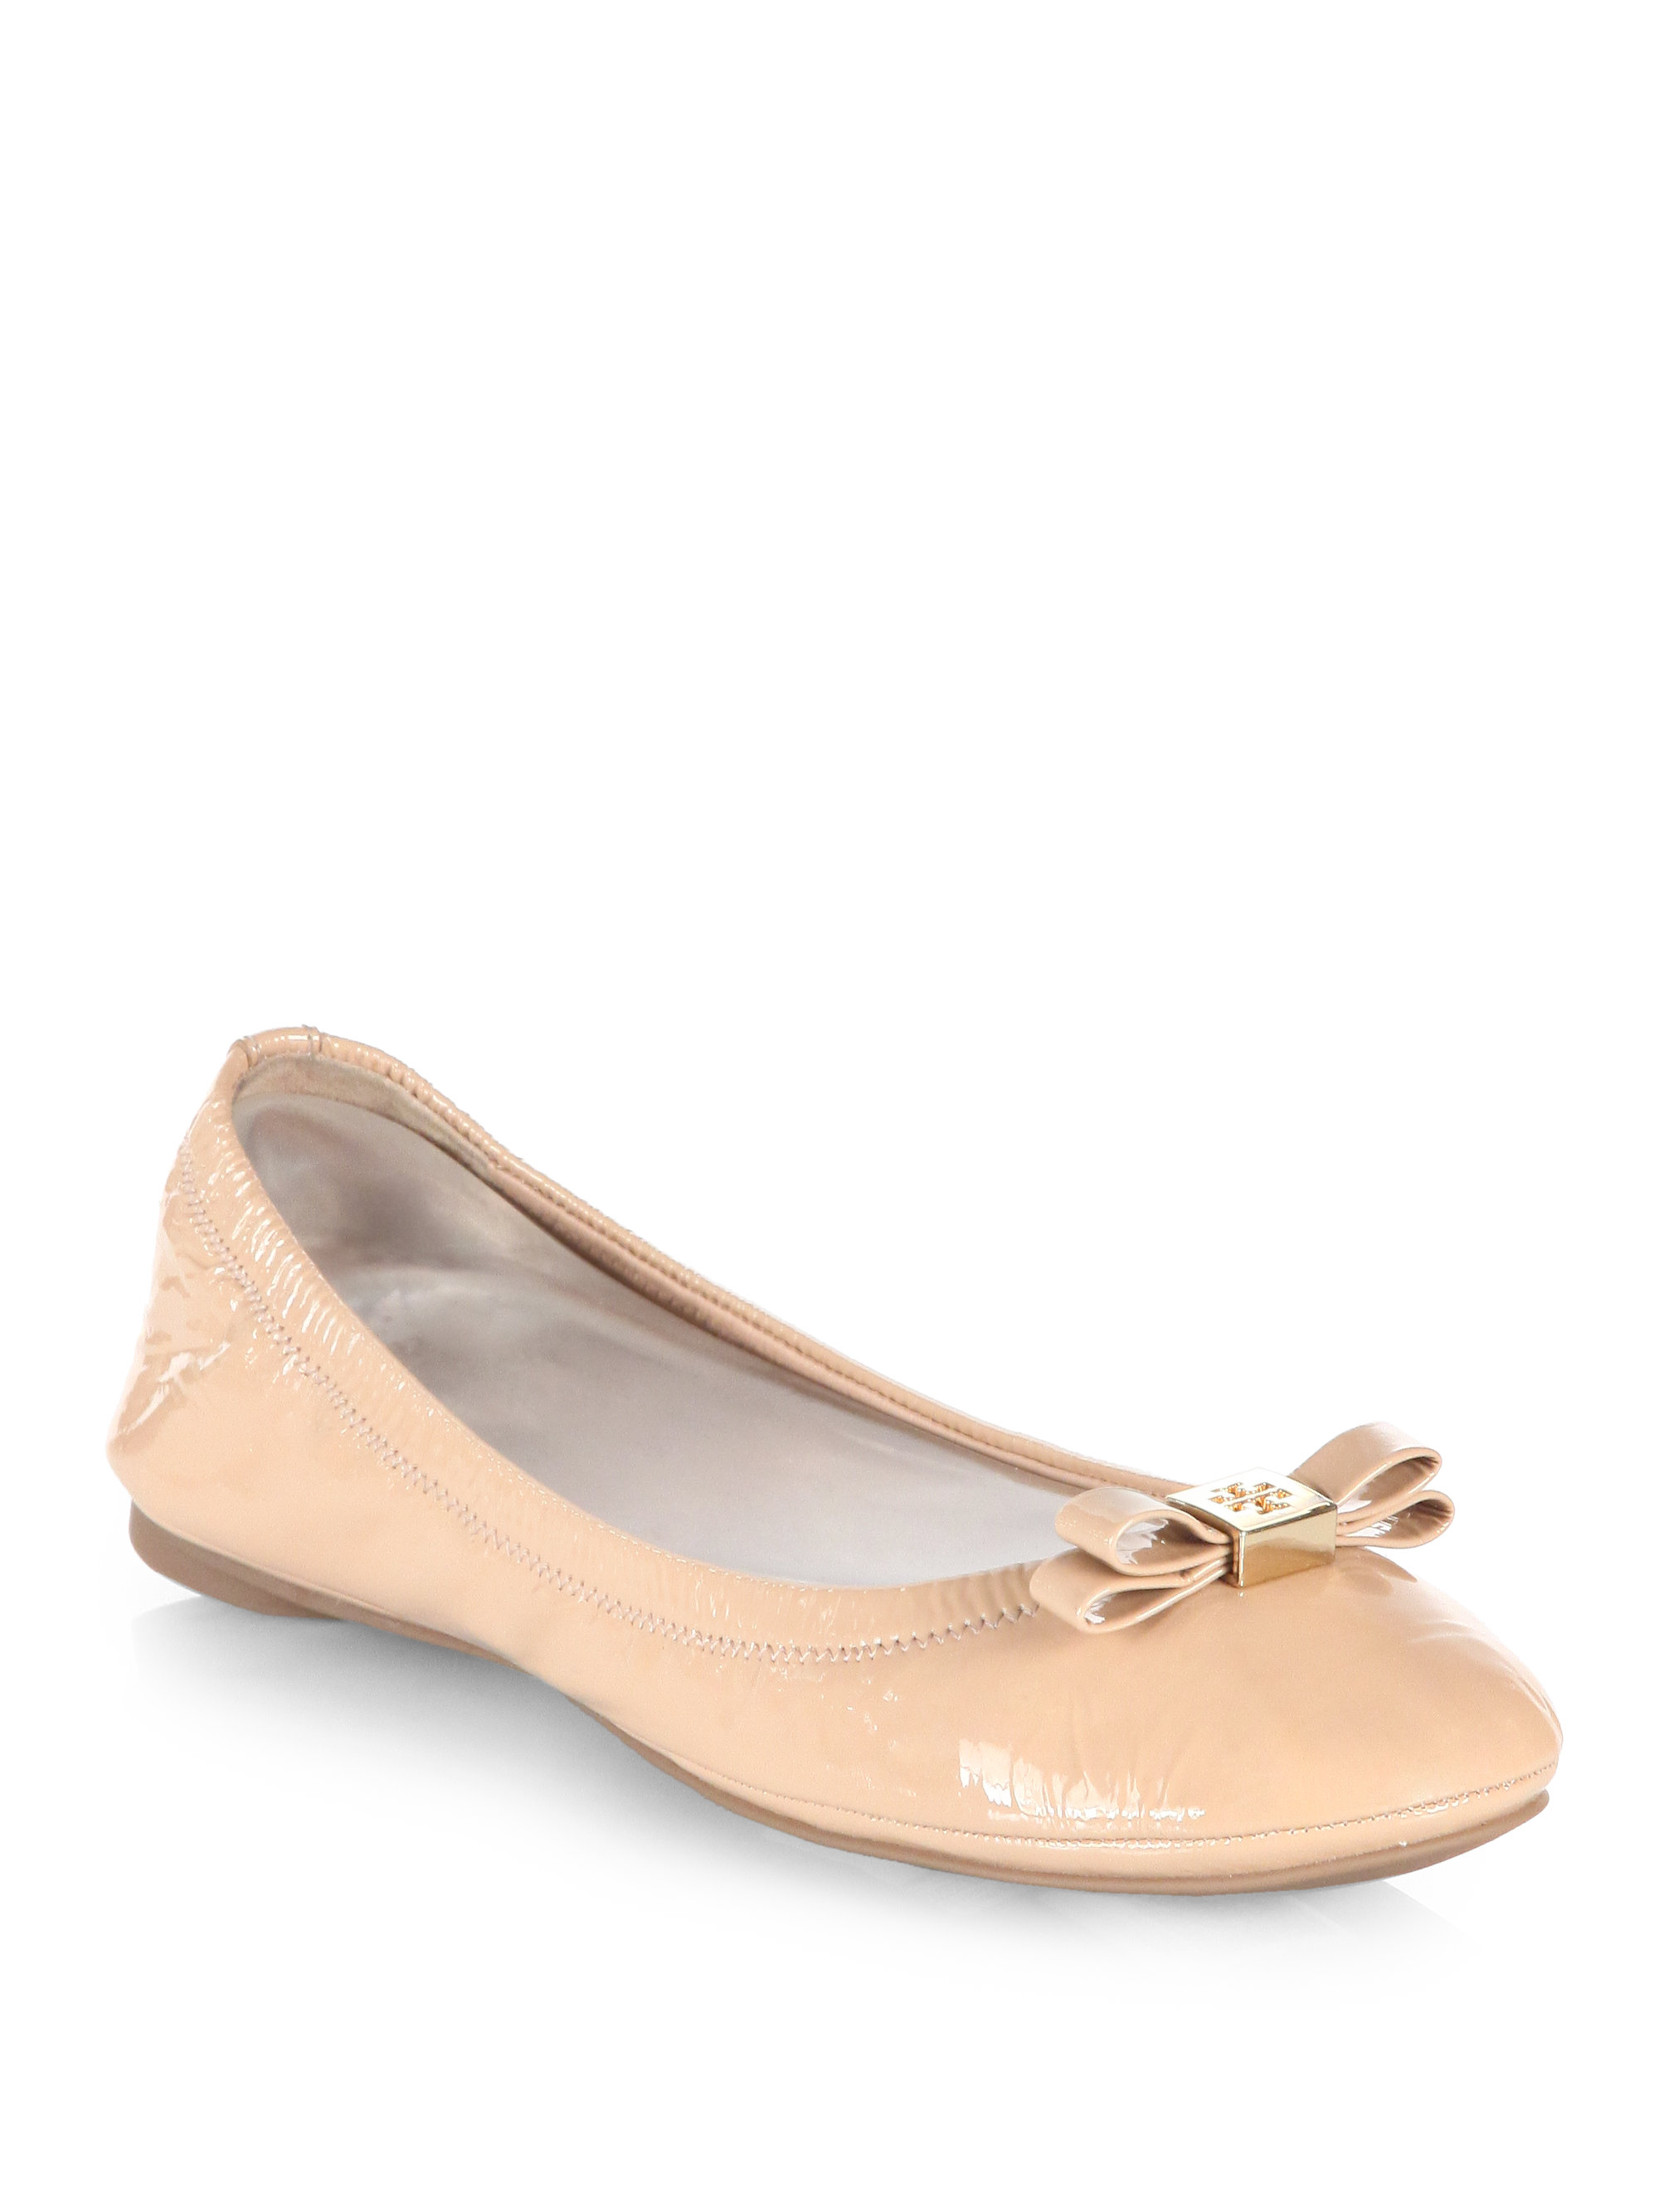 Tory Burch Eddie Patent Leather Ballet Flats in (camellia pink) | Lyst